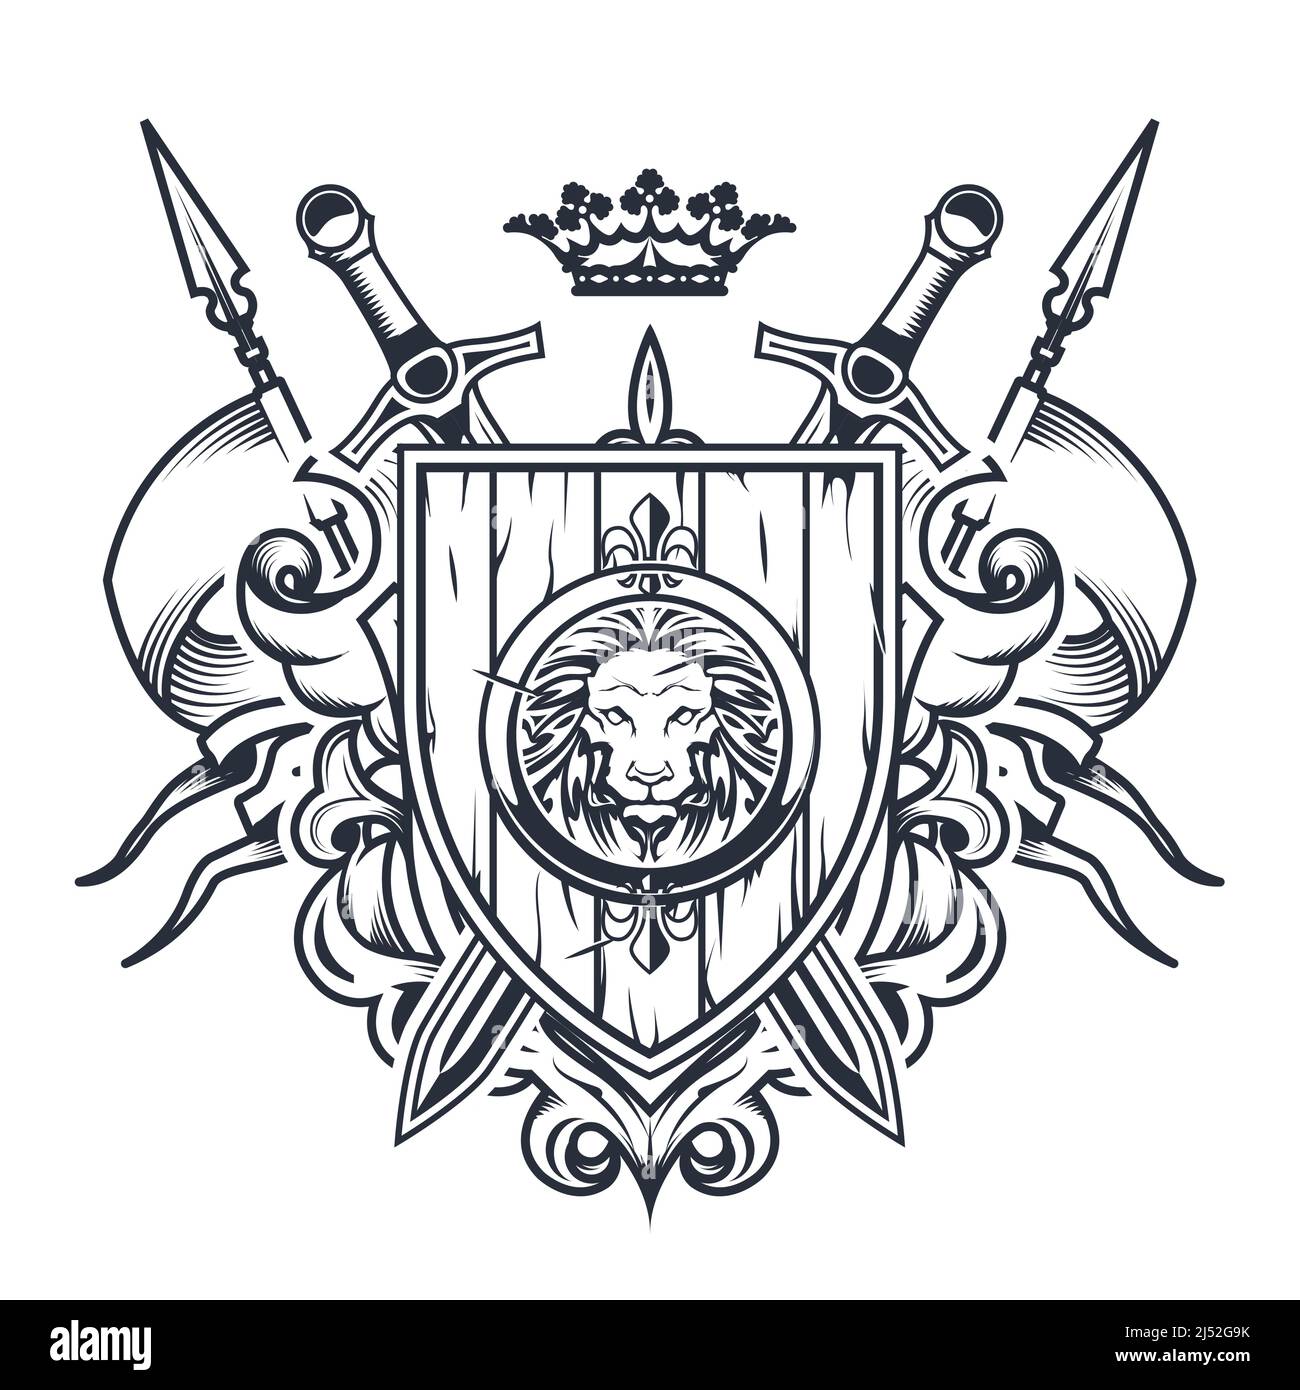 Sumptuous coat of arms with old wooden shield, swords and crown, knight crest, heraldic emblem or royal blazon, vector Stock Vector